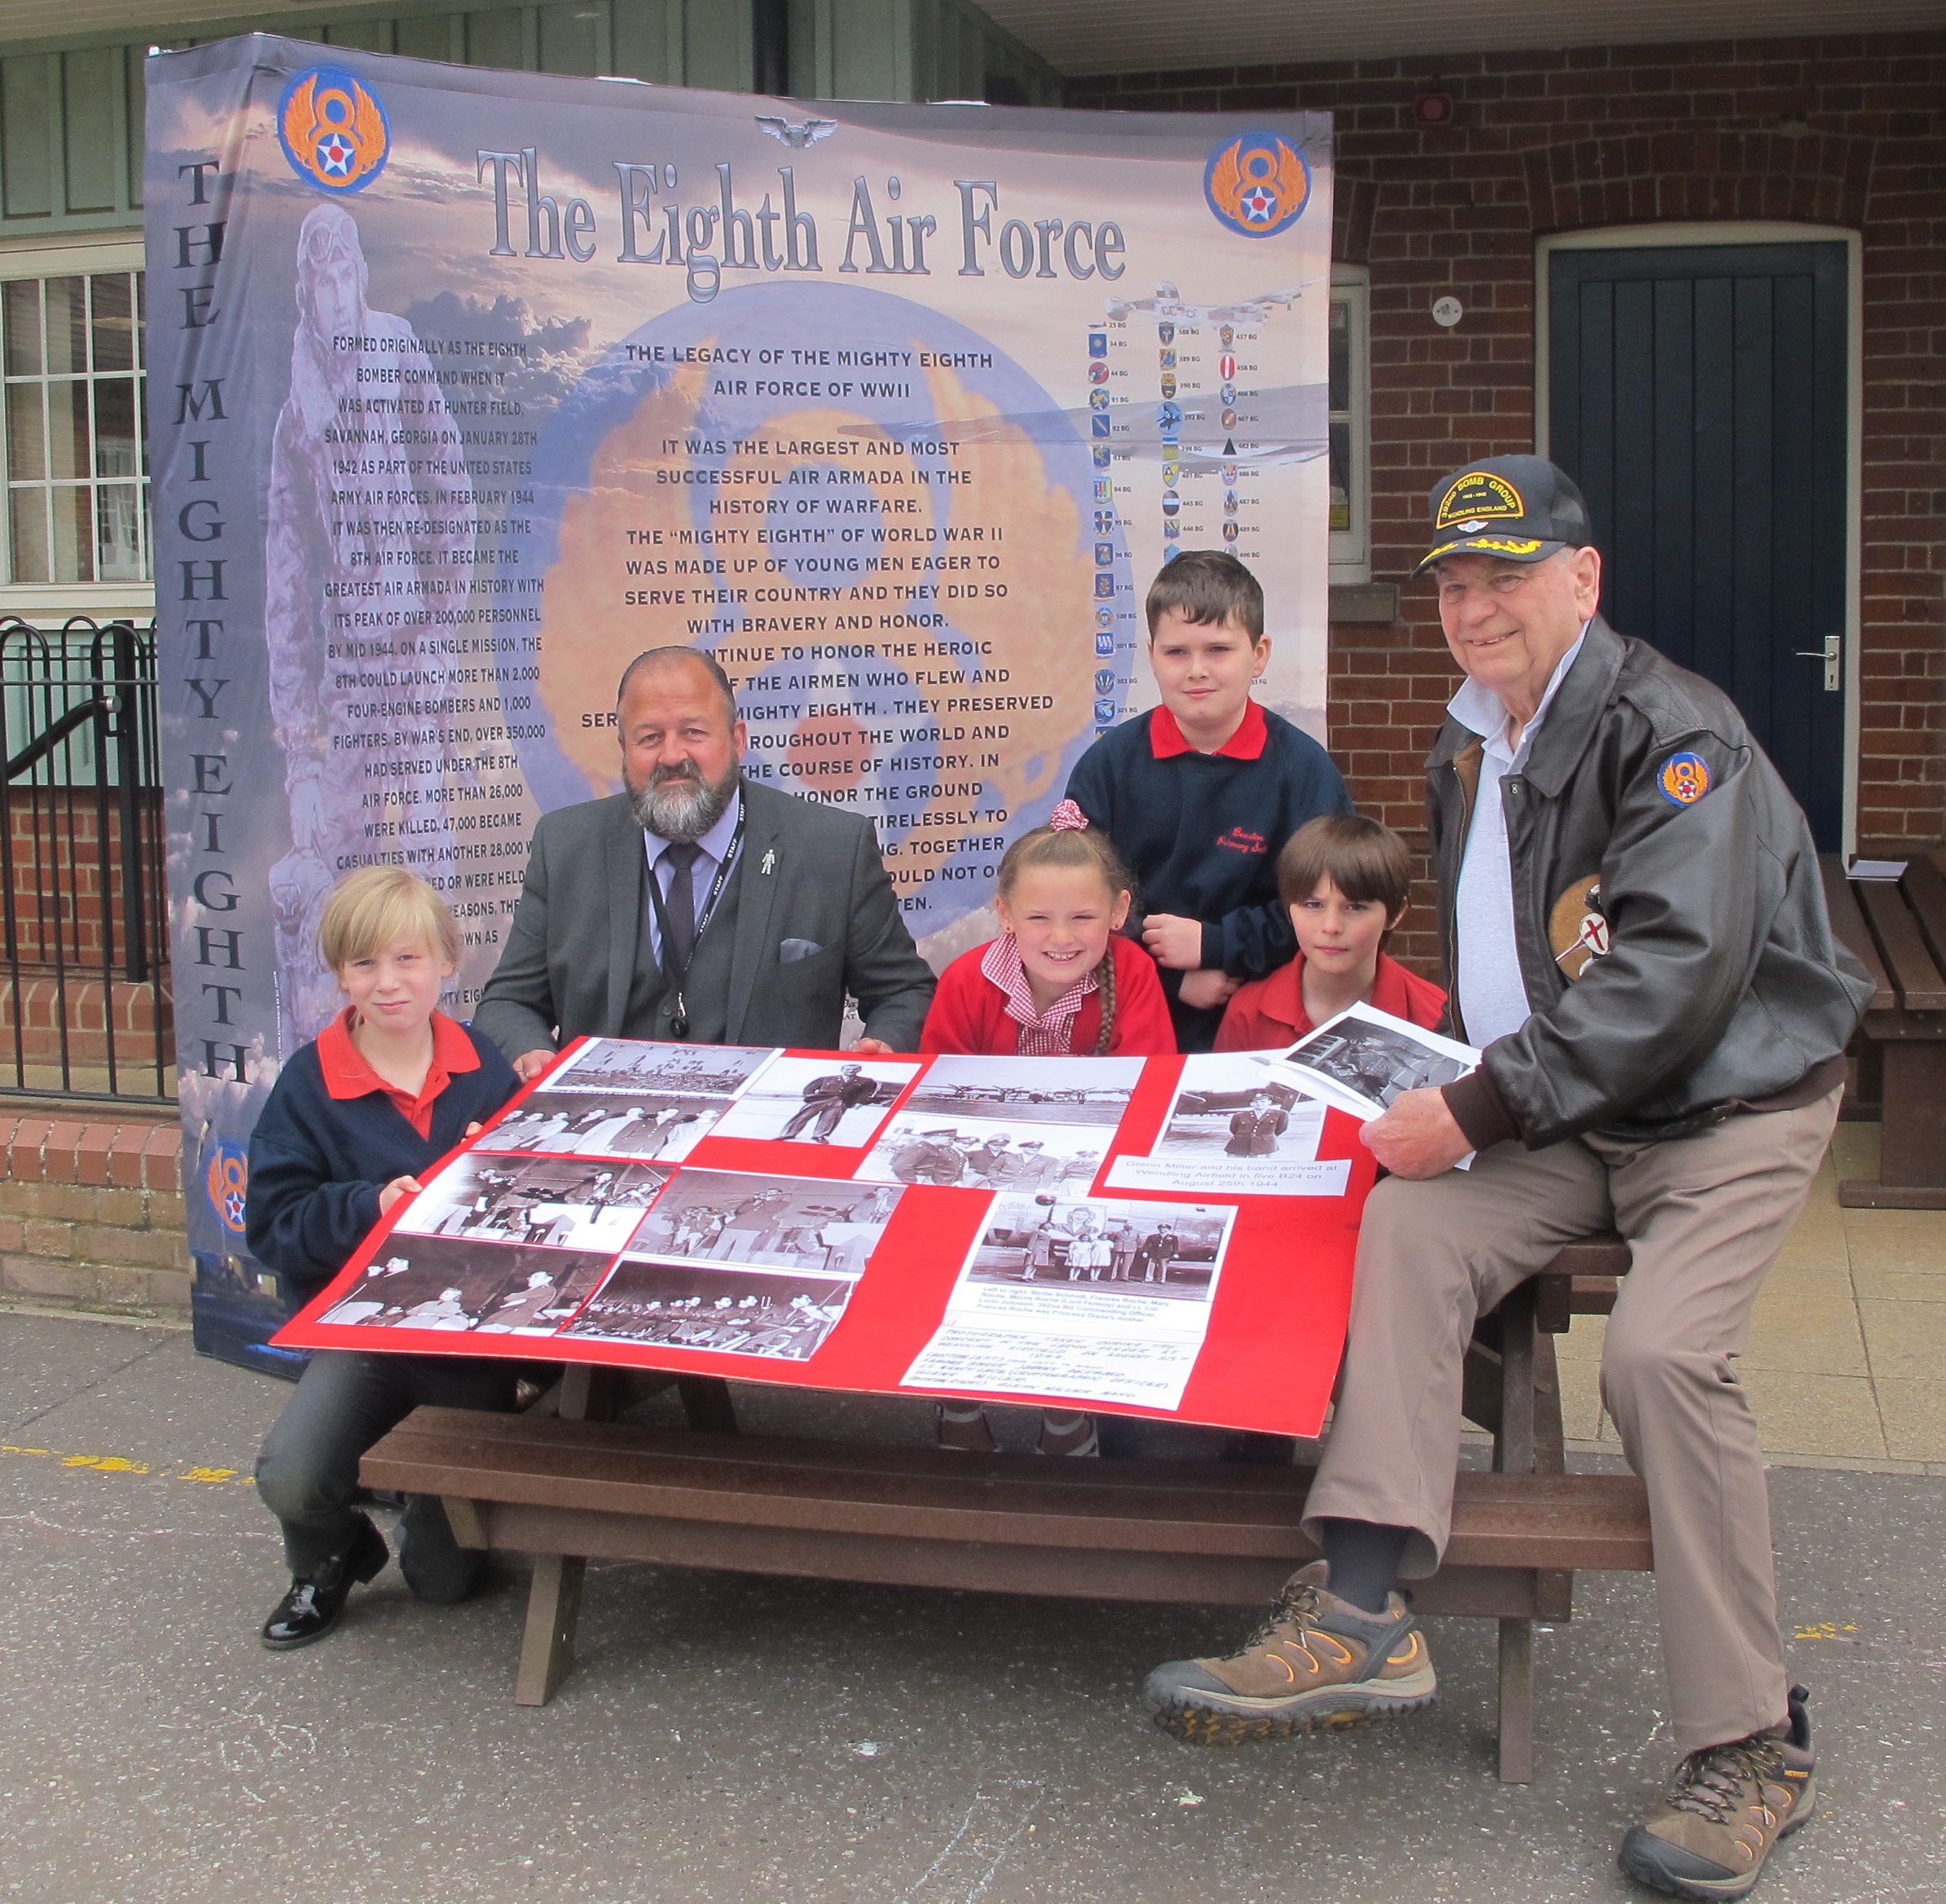 Former pupil presents school with special commemorative book to remember Norfolk’s American air base heritage